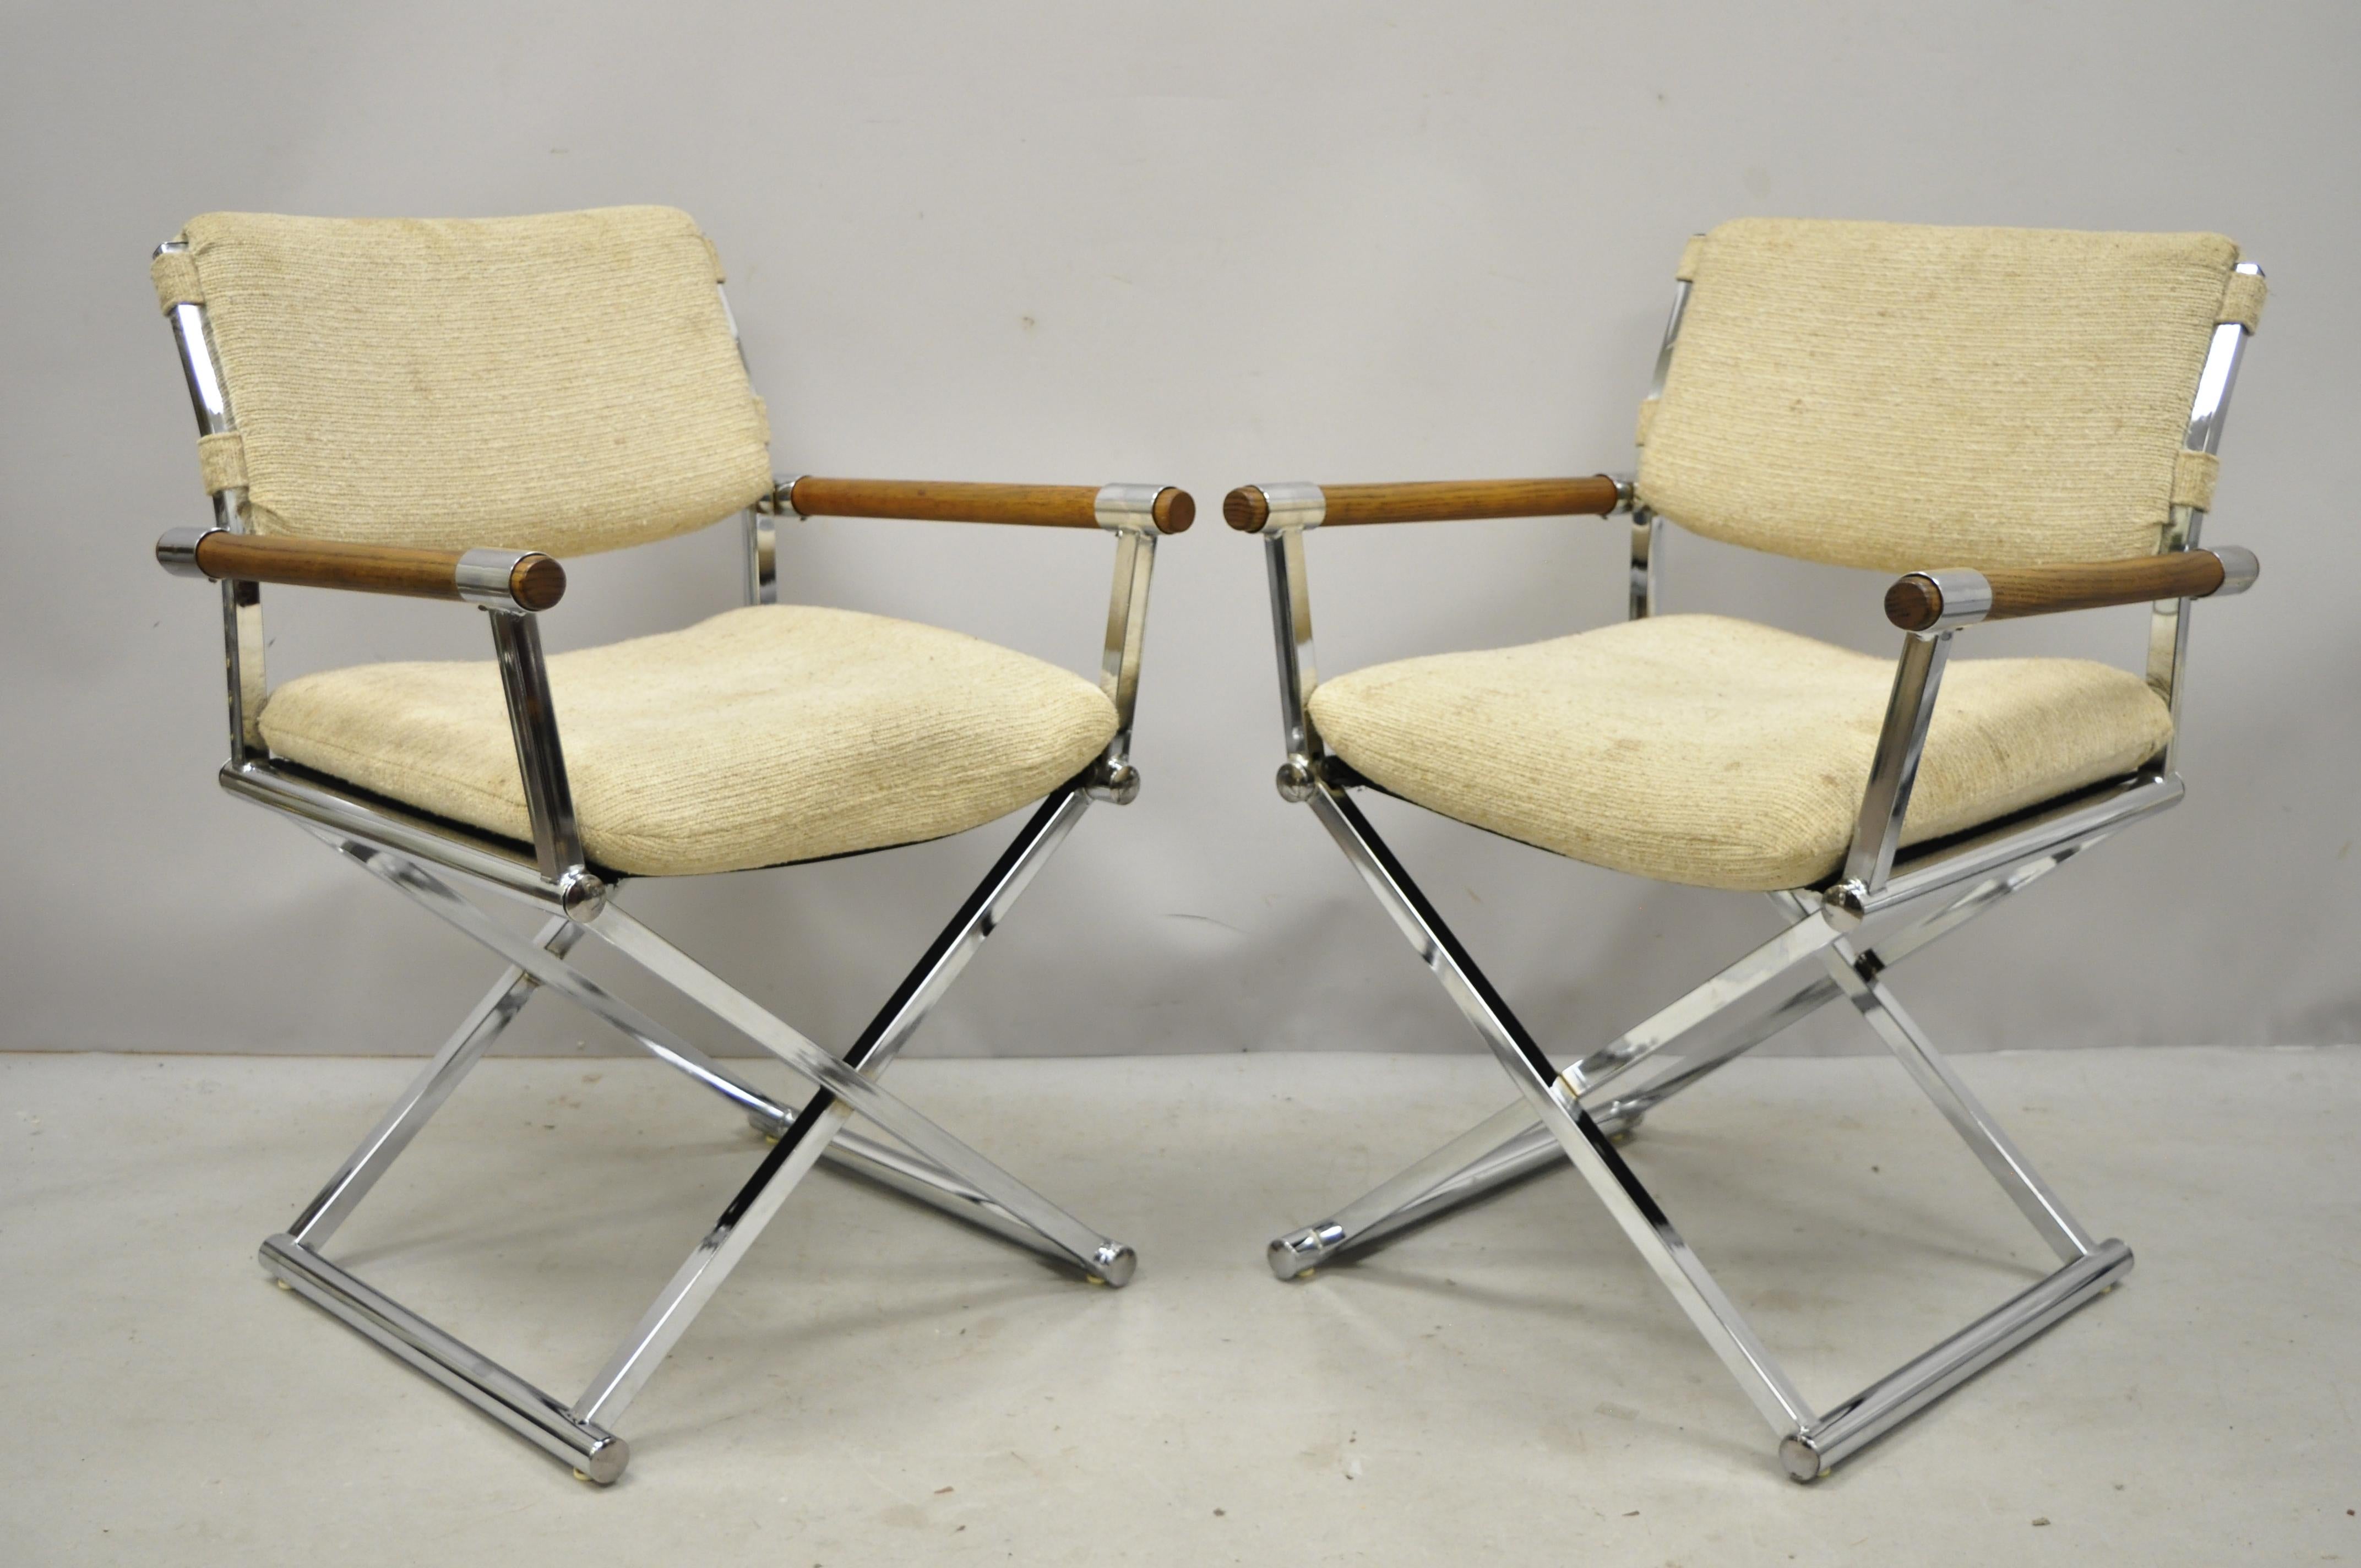 Pair of Mid-Century Modern chrome X-frame directors armchairs Cal Style Furn. (A). Item features chrome metal frames, solid wood arms, X-frame base, original label, clean modernist lines, sleek sculptural form, circa late 20th century. Measurements: